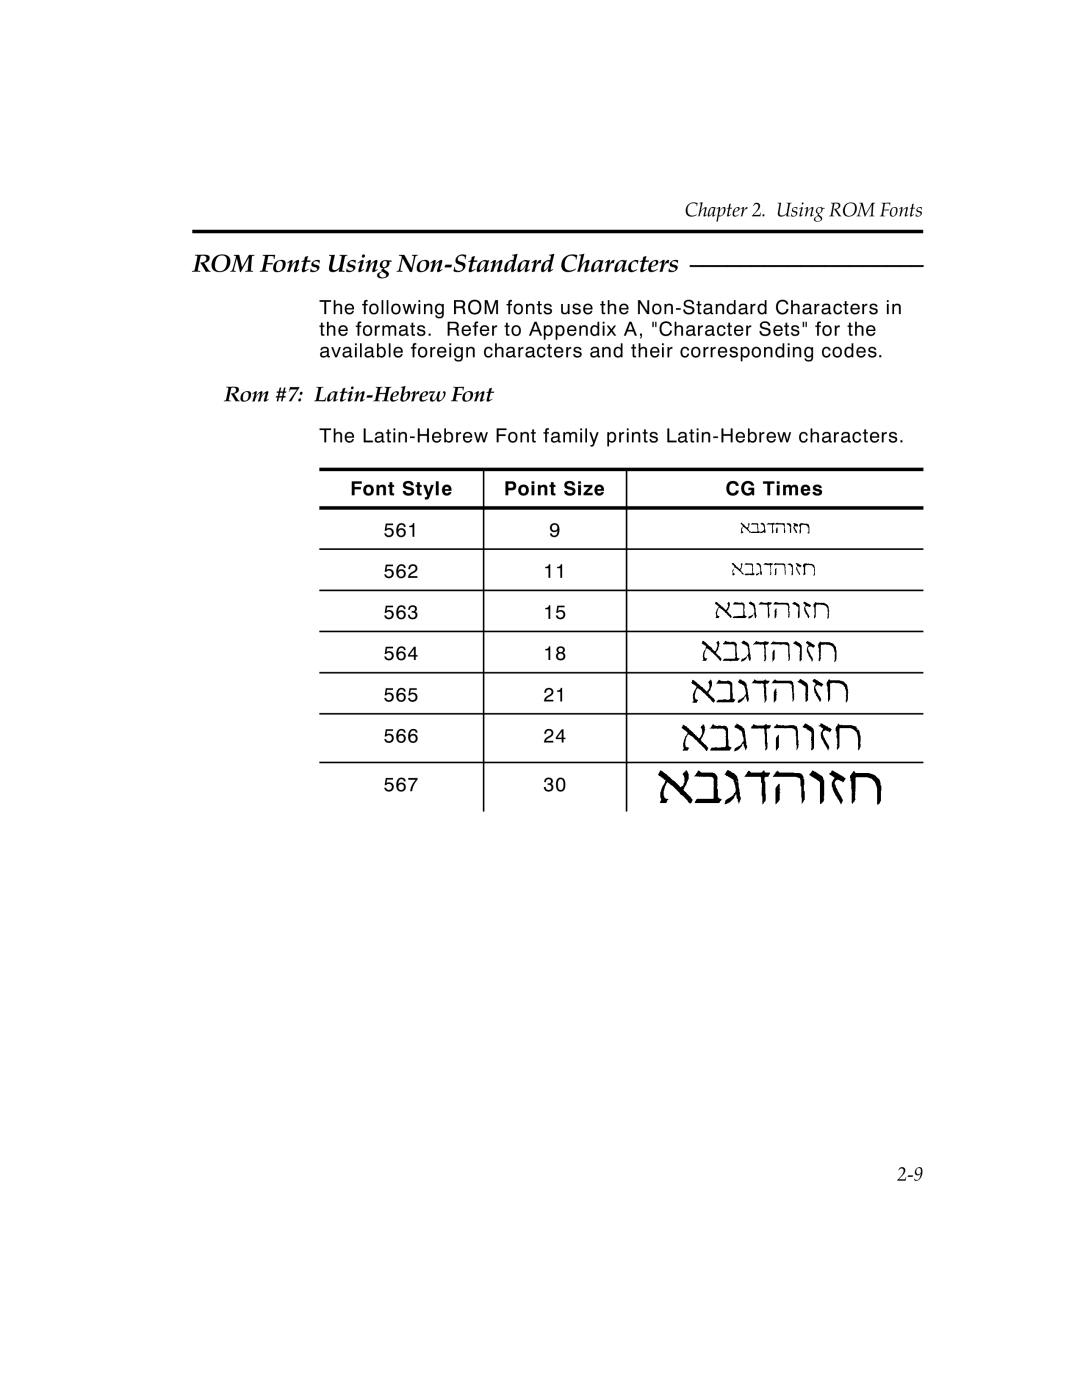 Paxar MPCL II ROM Fonts Using Non-Standard Characters, Rom #7 Latin-Hebrew Font, Using ROM Fonts, Font Style, Point Size 